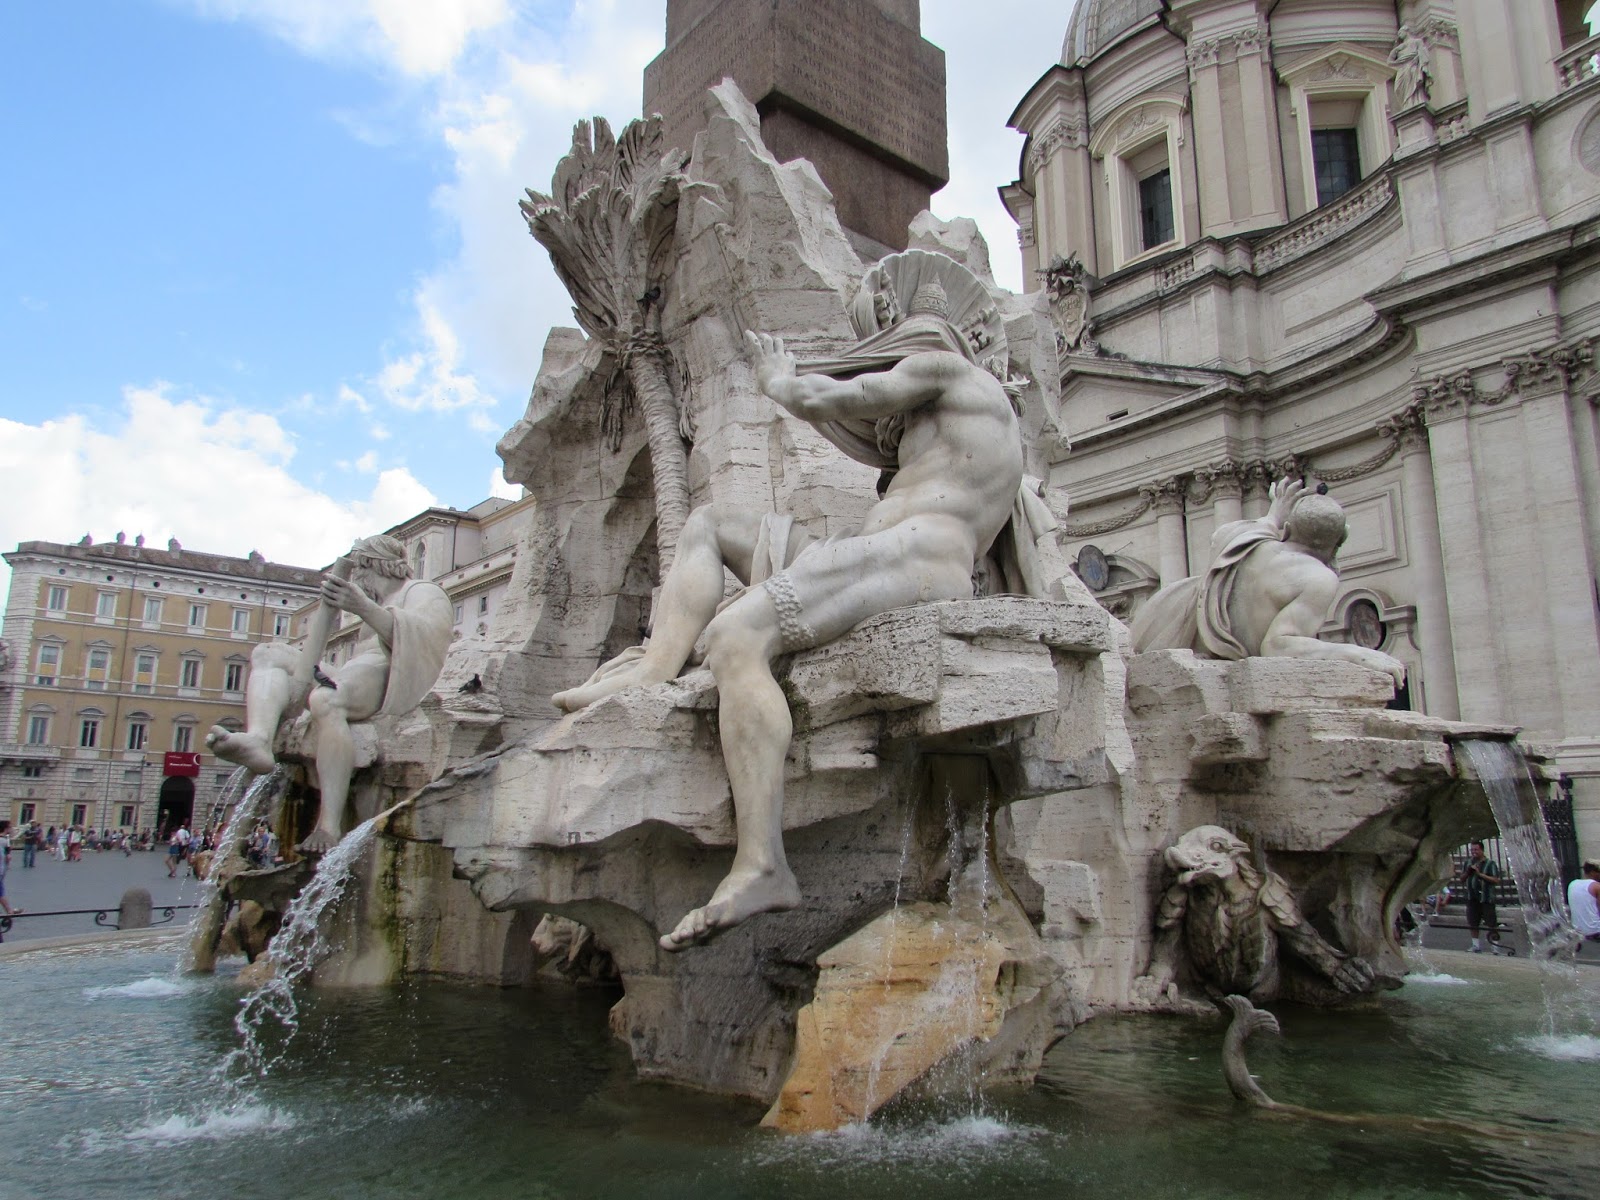 Gian Lorenzo Bernini – sculptor and architect | Italy On This Day